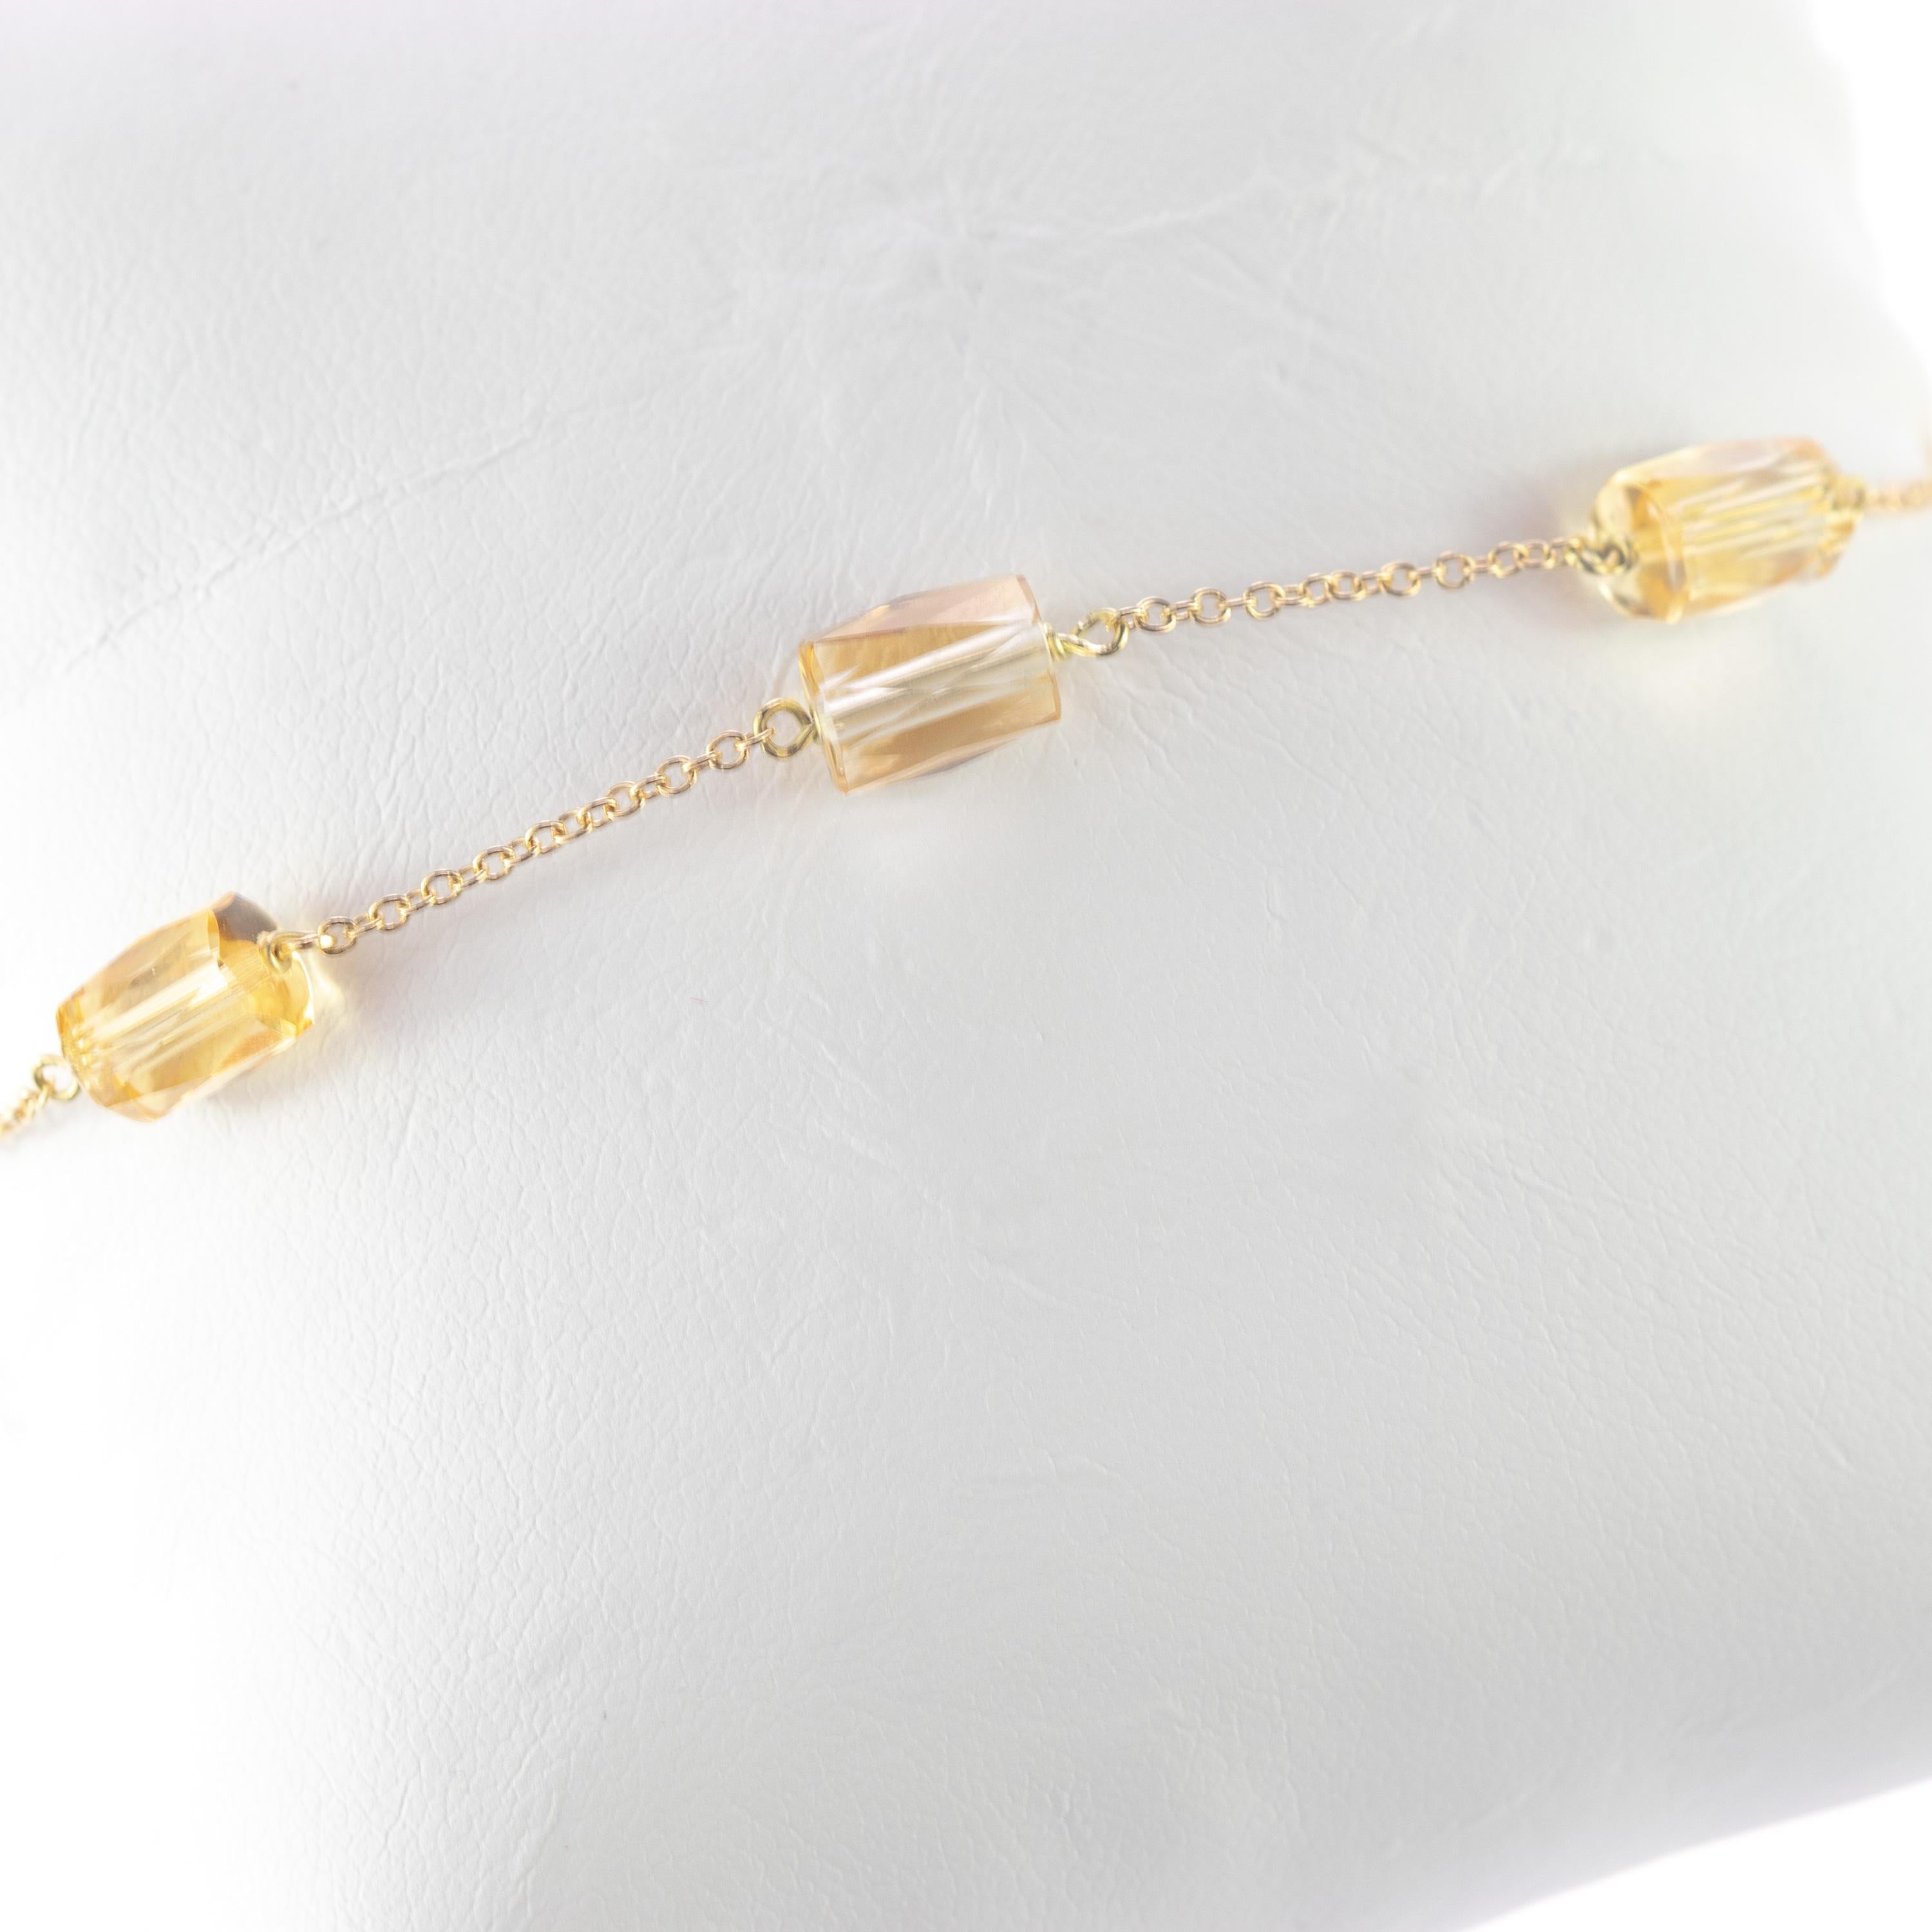 Intini Jewels signature quality on a modern and contemporary design jewel. Bracelet or Anklet.

Six gems of top quality pure citrine quartz embellish a delicate 9 karat yellow gold chain bracelet.
 
An elegant touch of glamour at your fingertips.